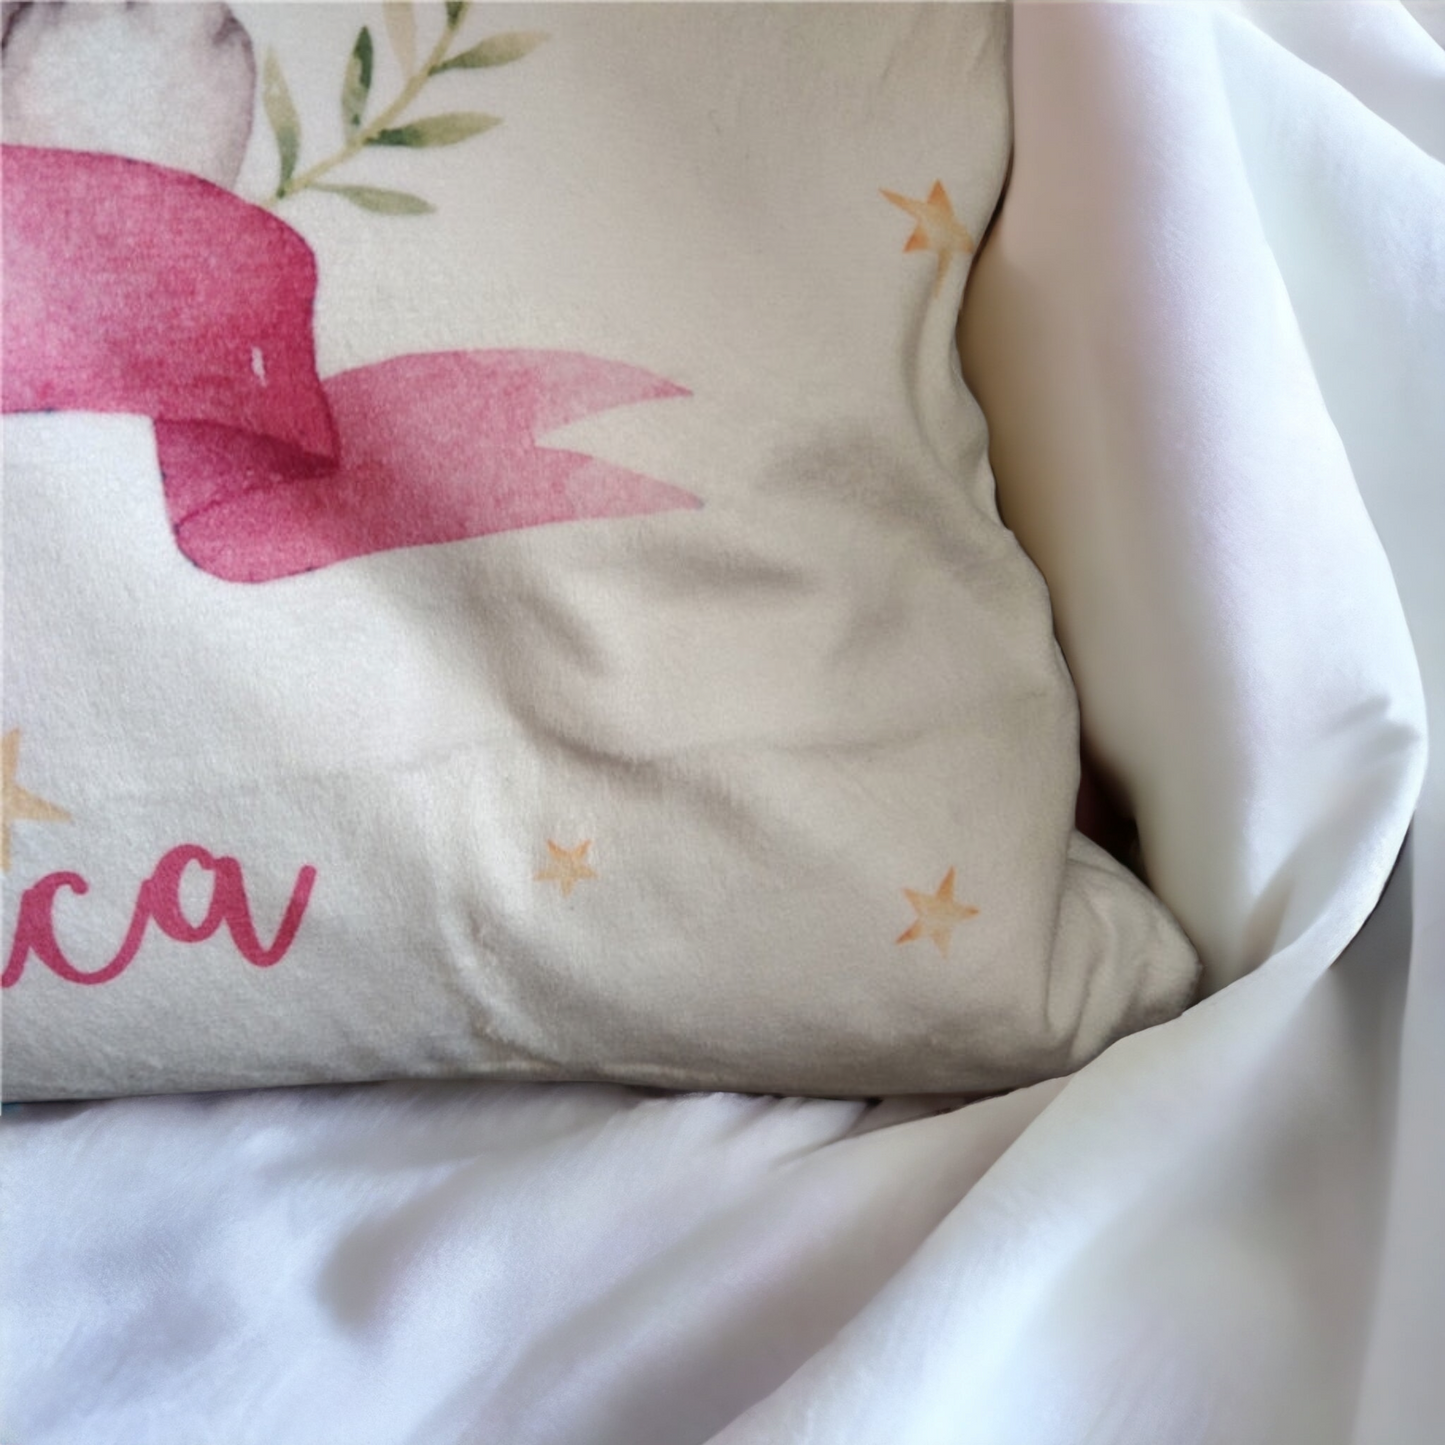 Personnalized Pillow Cover with Name